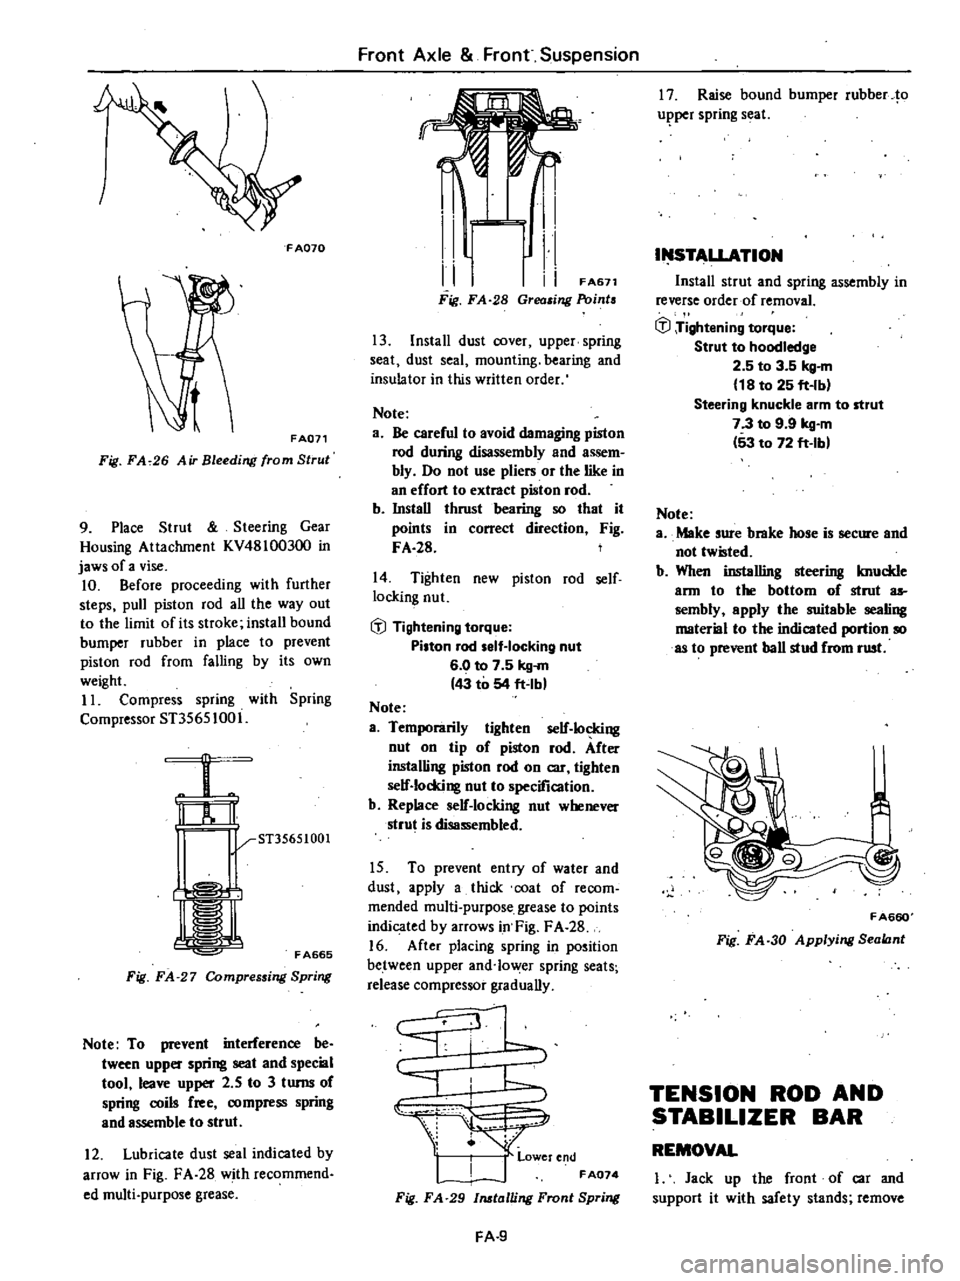 DATSUN 210 1979  Service Manual 
FA070

FA071

Fig 
FA

26 
Air 
Bleeding 
from 
Strul

9 
Place 
Strut

Steering 
Gear

Housing 
Attachment 
KV48100300 
in

jaws 
of 
a 
vise

10

Before

proceeding 
with 
further

steps 
pull 
pis